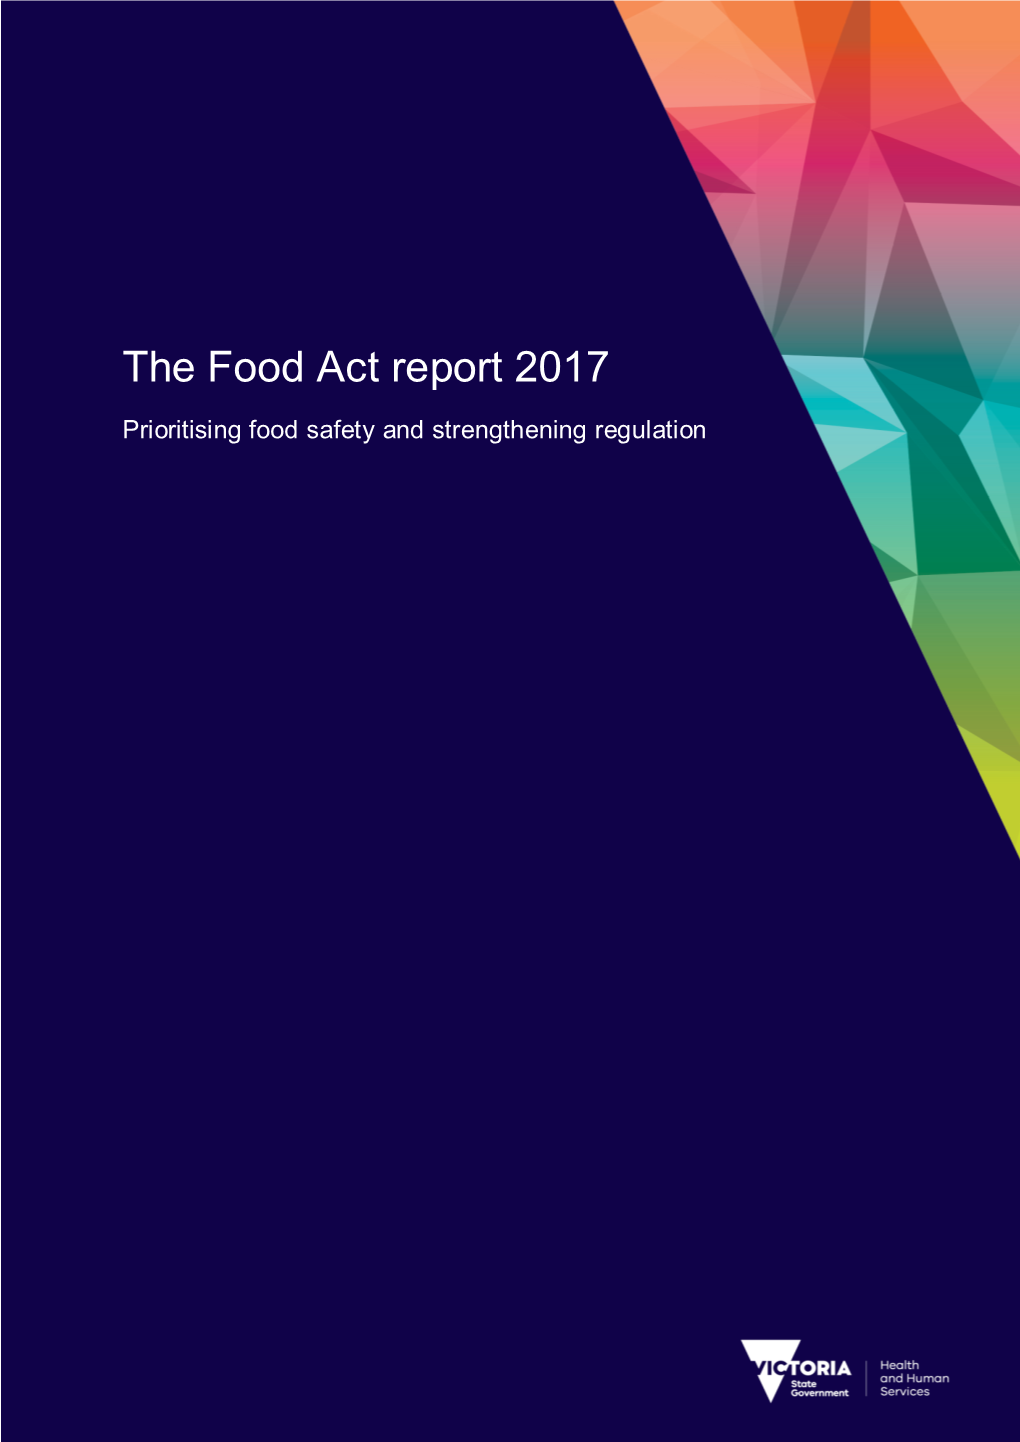 The Food Act Report 2017